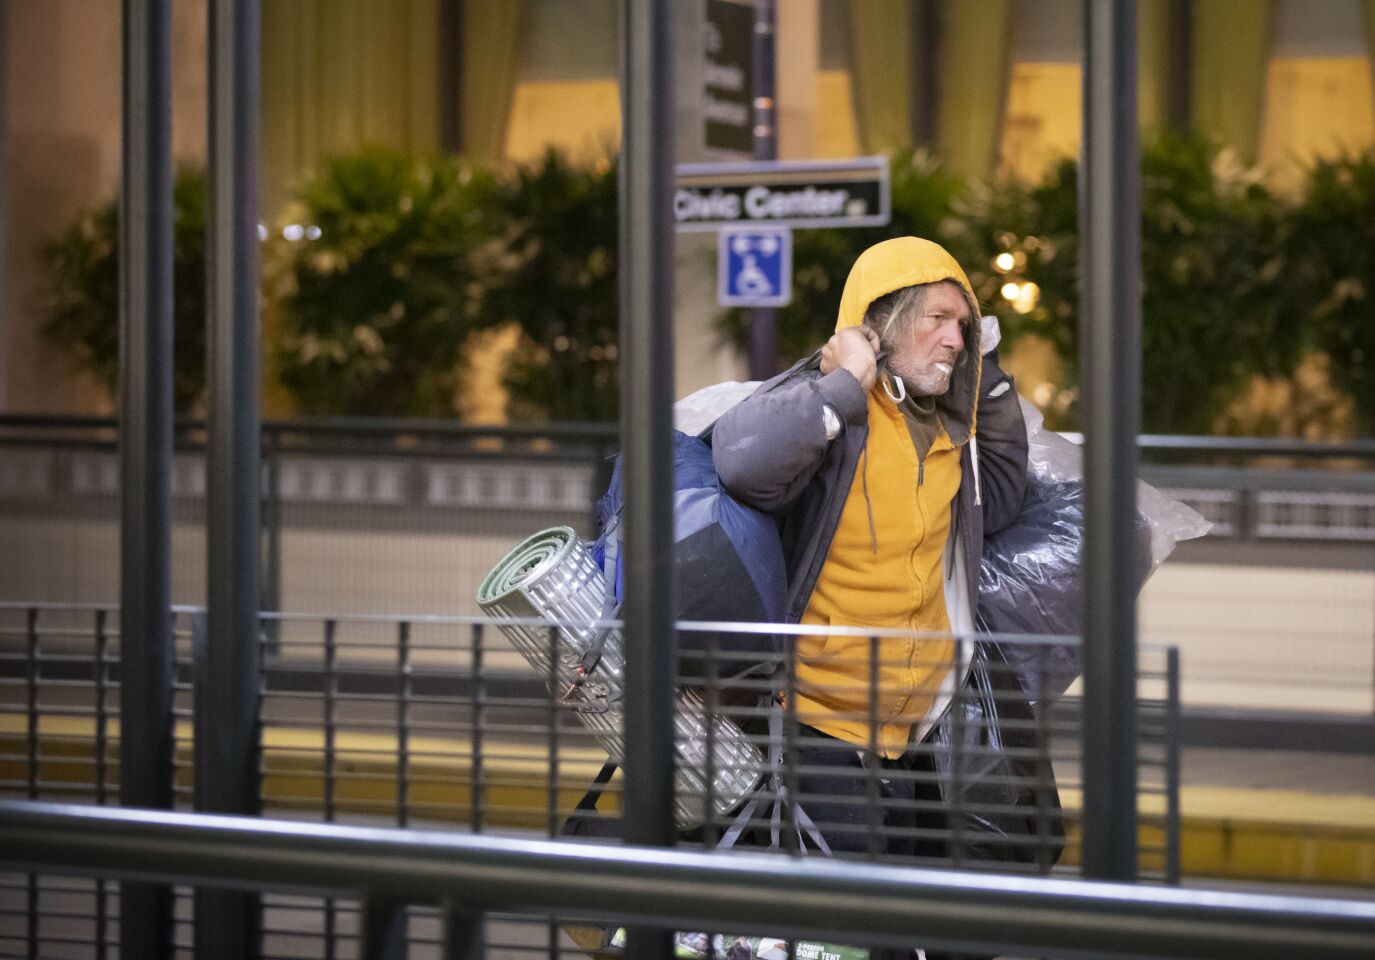 A homeless man, carrying bags full of cans, walks along C Street before sunrise near San Diego City Hall, January 23, 2020 during the annual point-in-time homeless count.